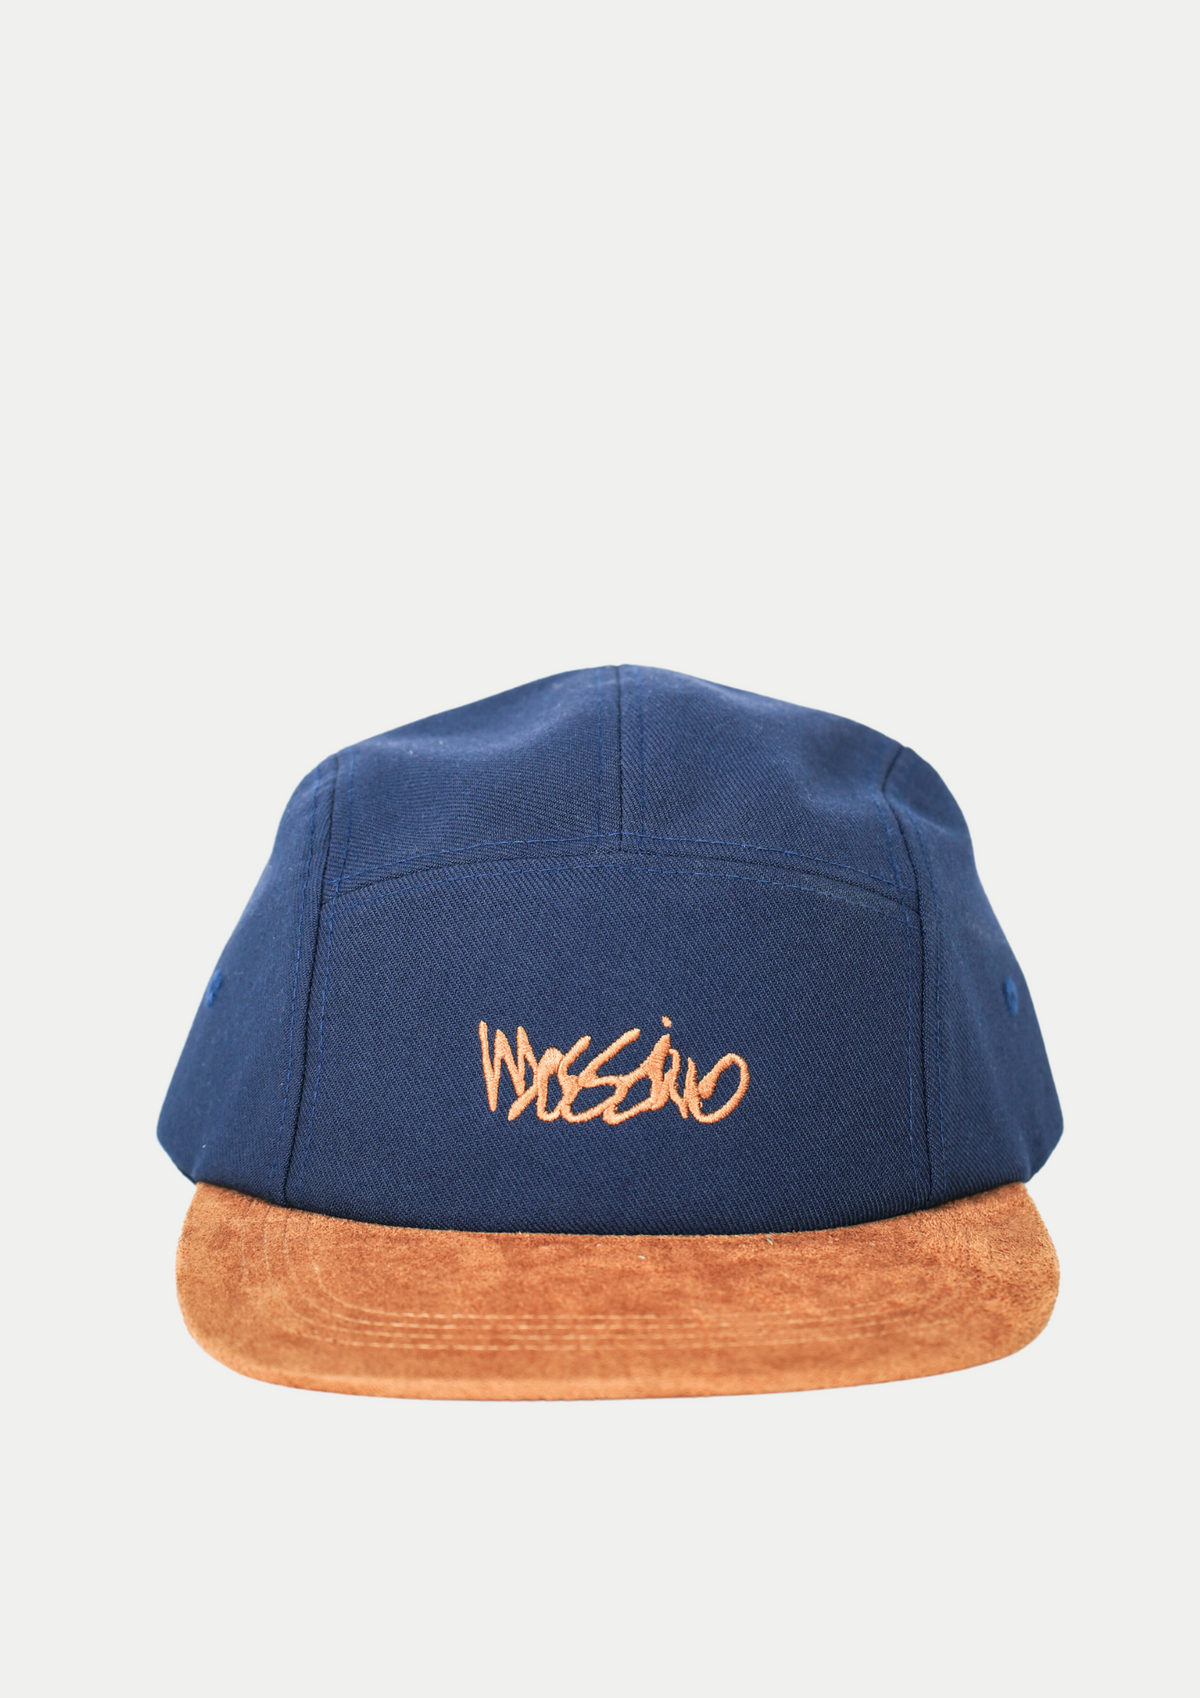 Mossimo Navy Blue Panel Cap with Embroidery